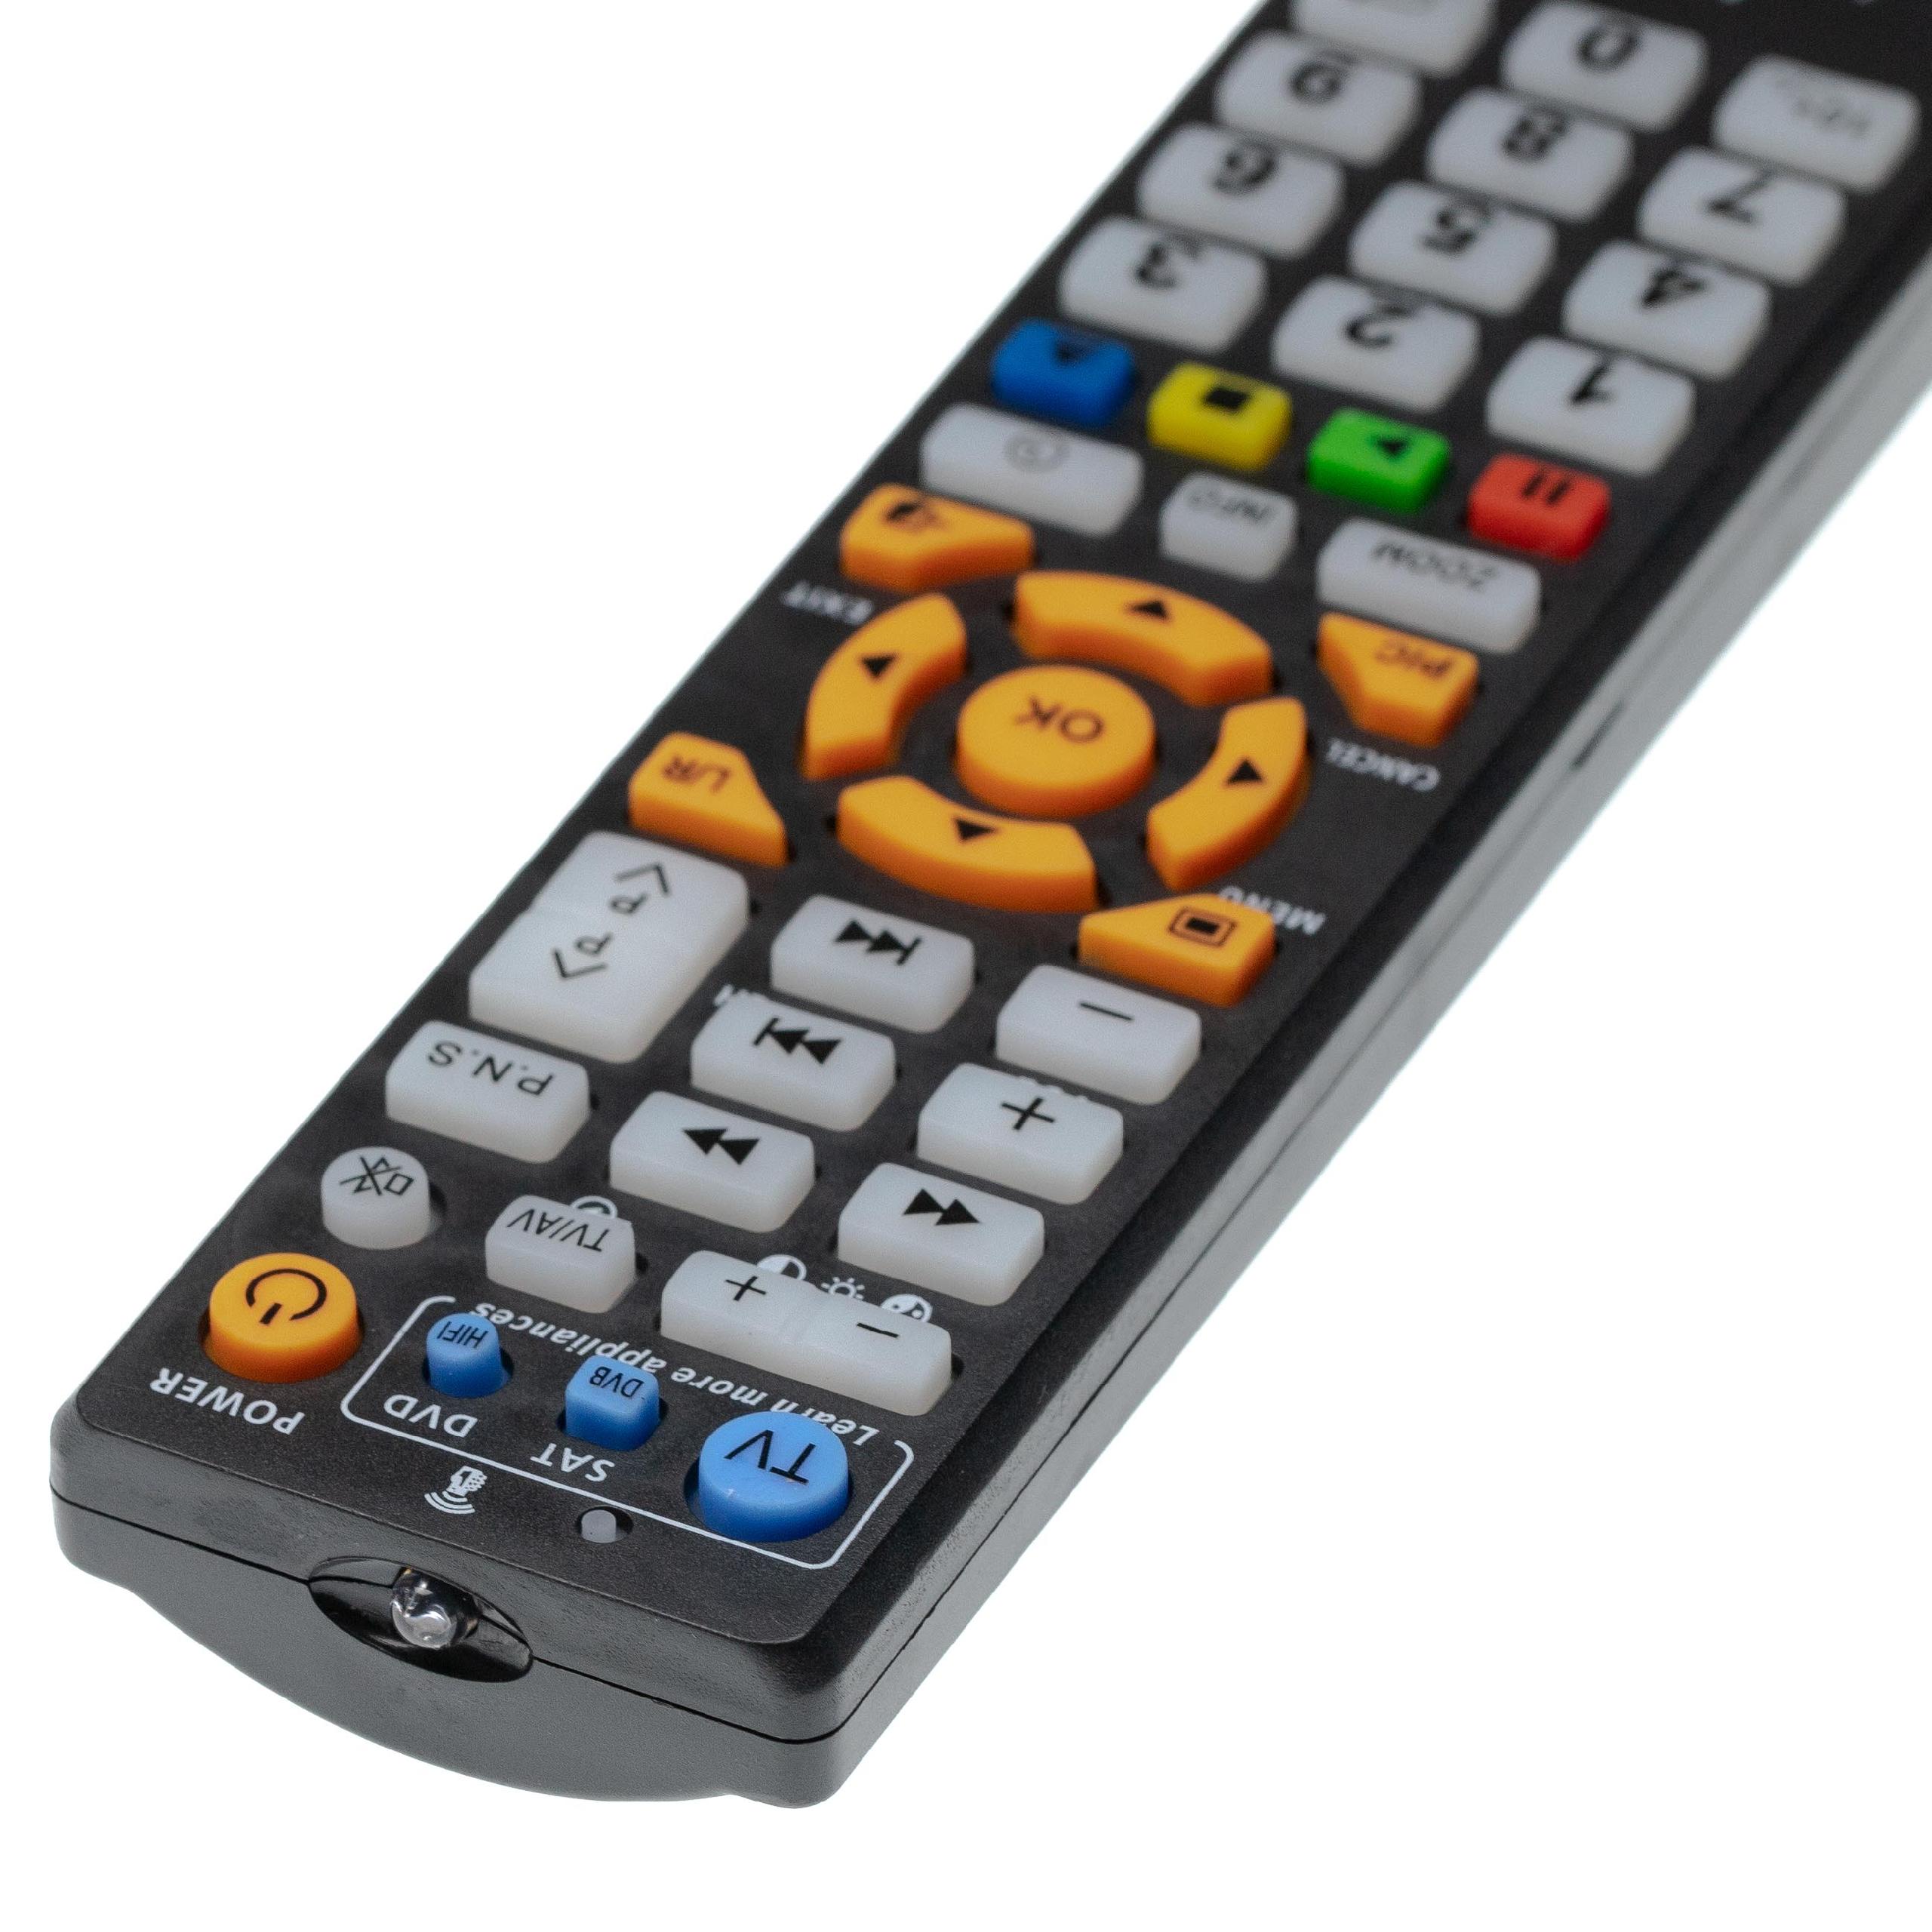  multi-function remote control replaces Type L336 for TV